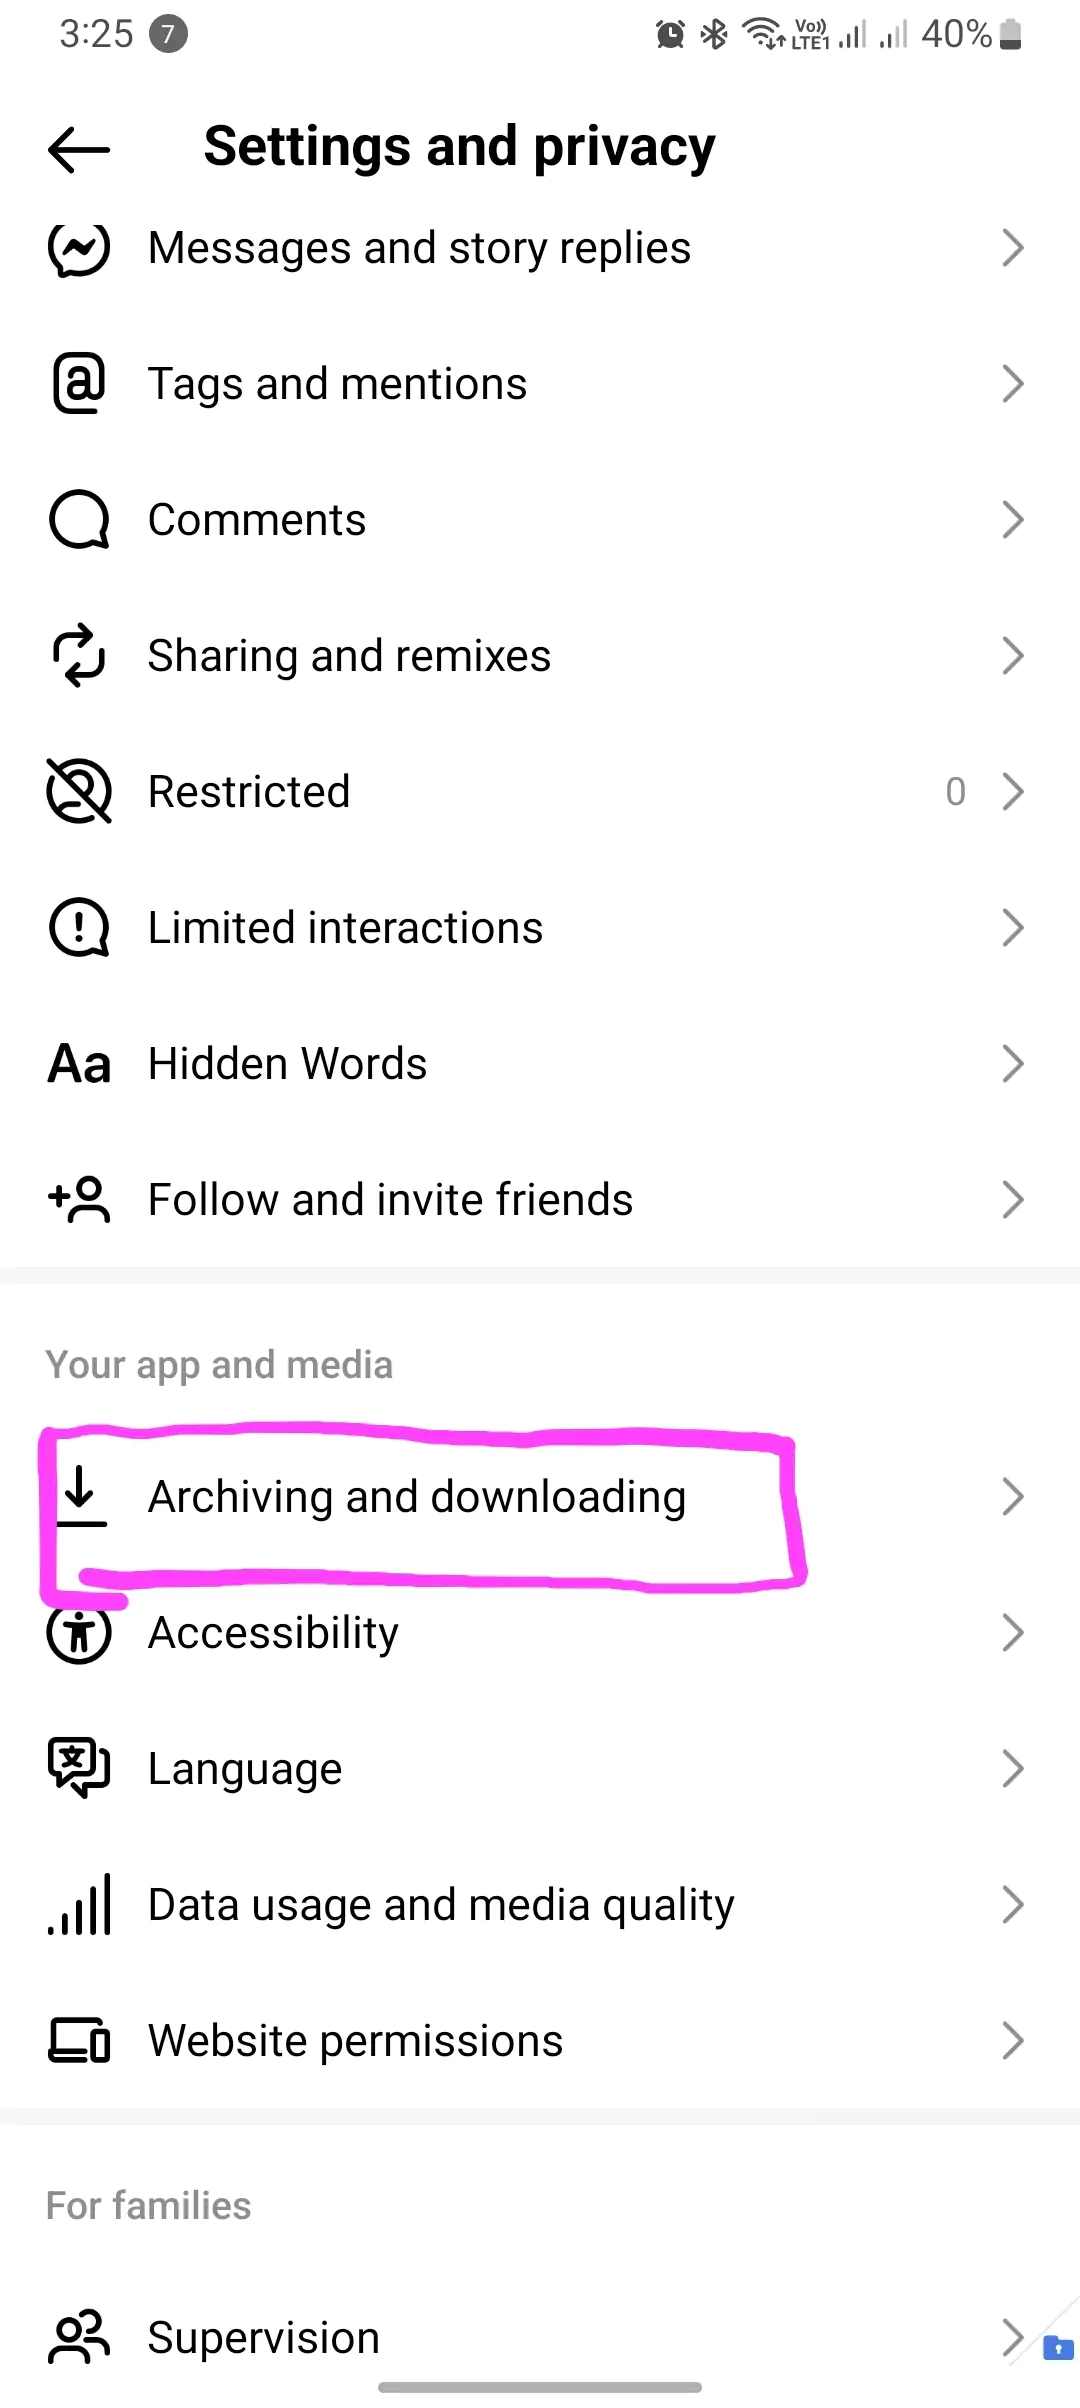 archiving and downloading settings screenshot highlighted